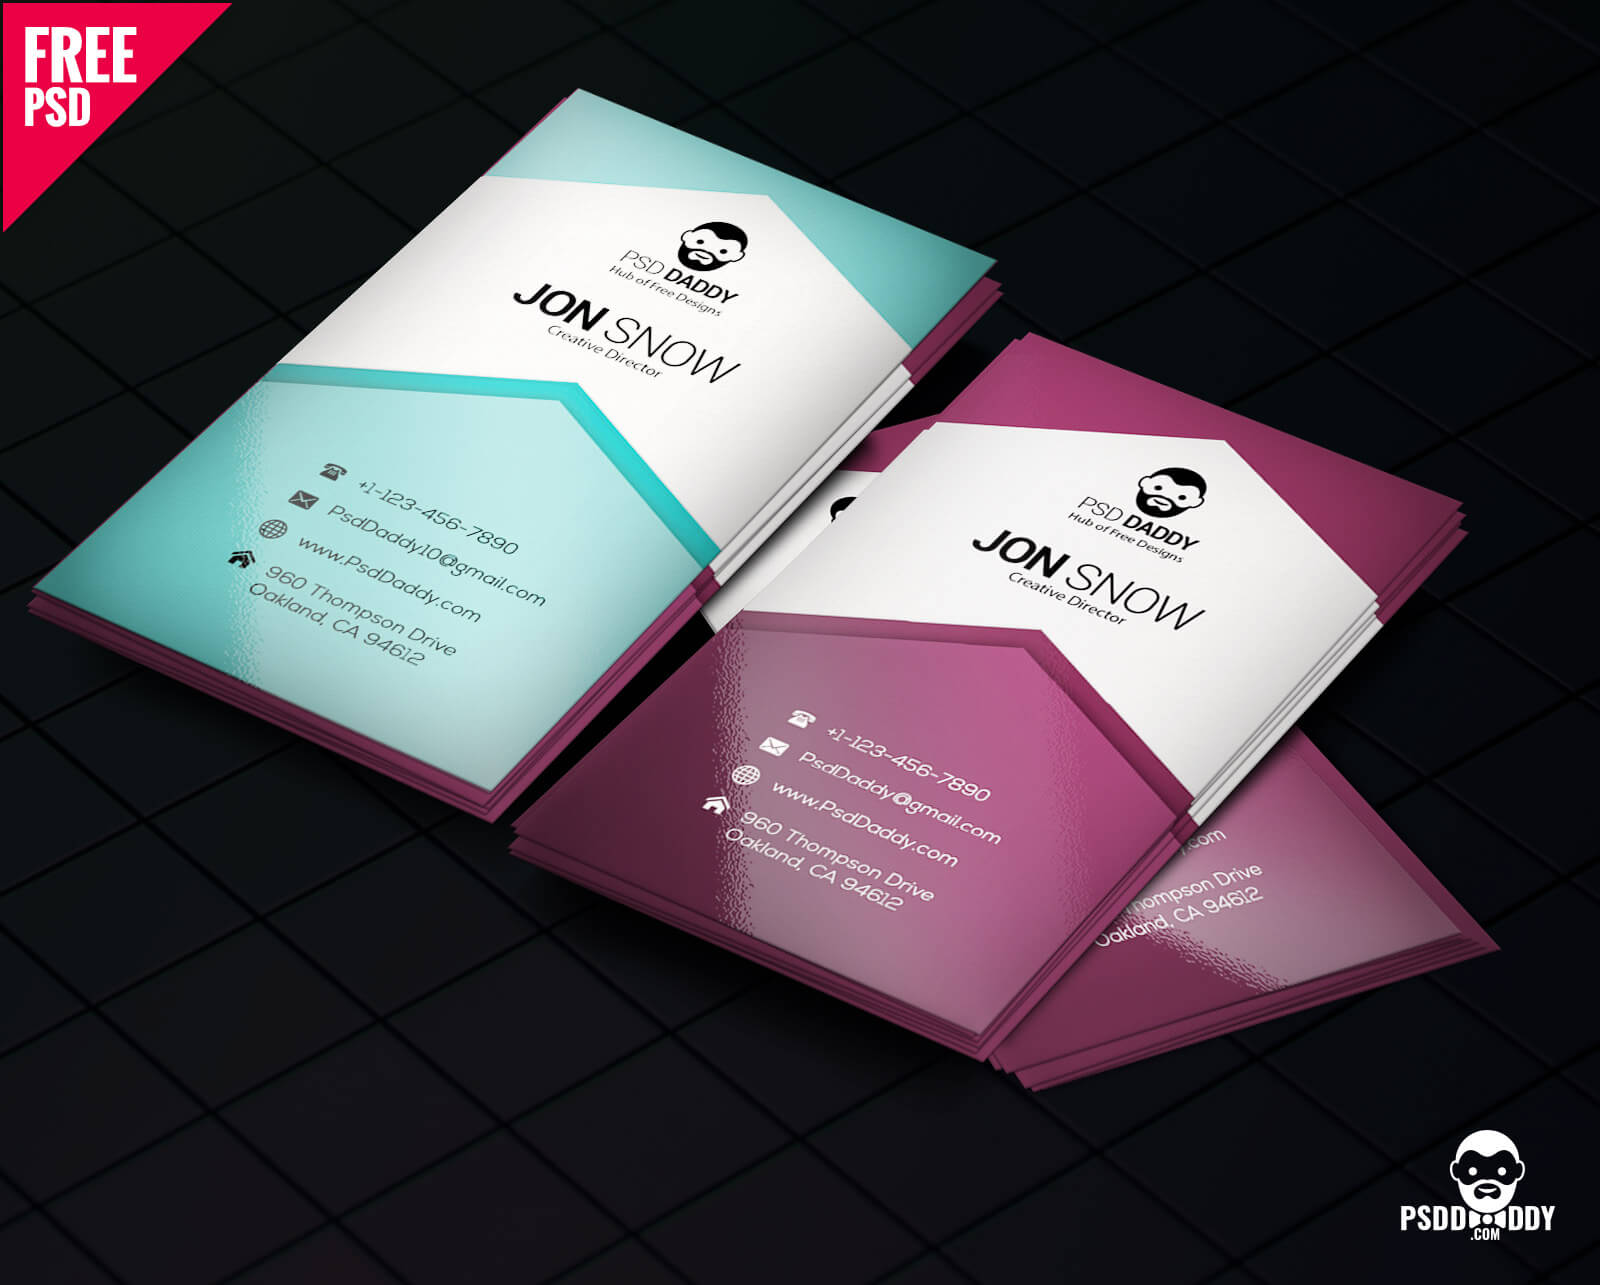 Download]Creative Business Card Psd Free | Psddaddy In Visiting Card Psd Template Free Download